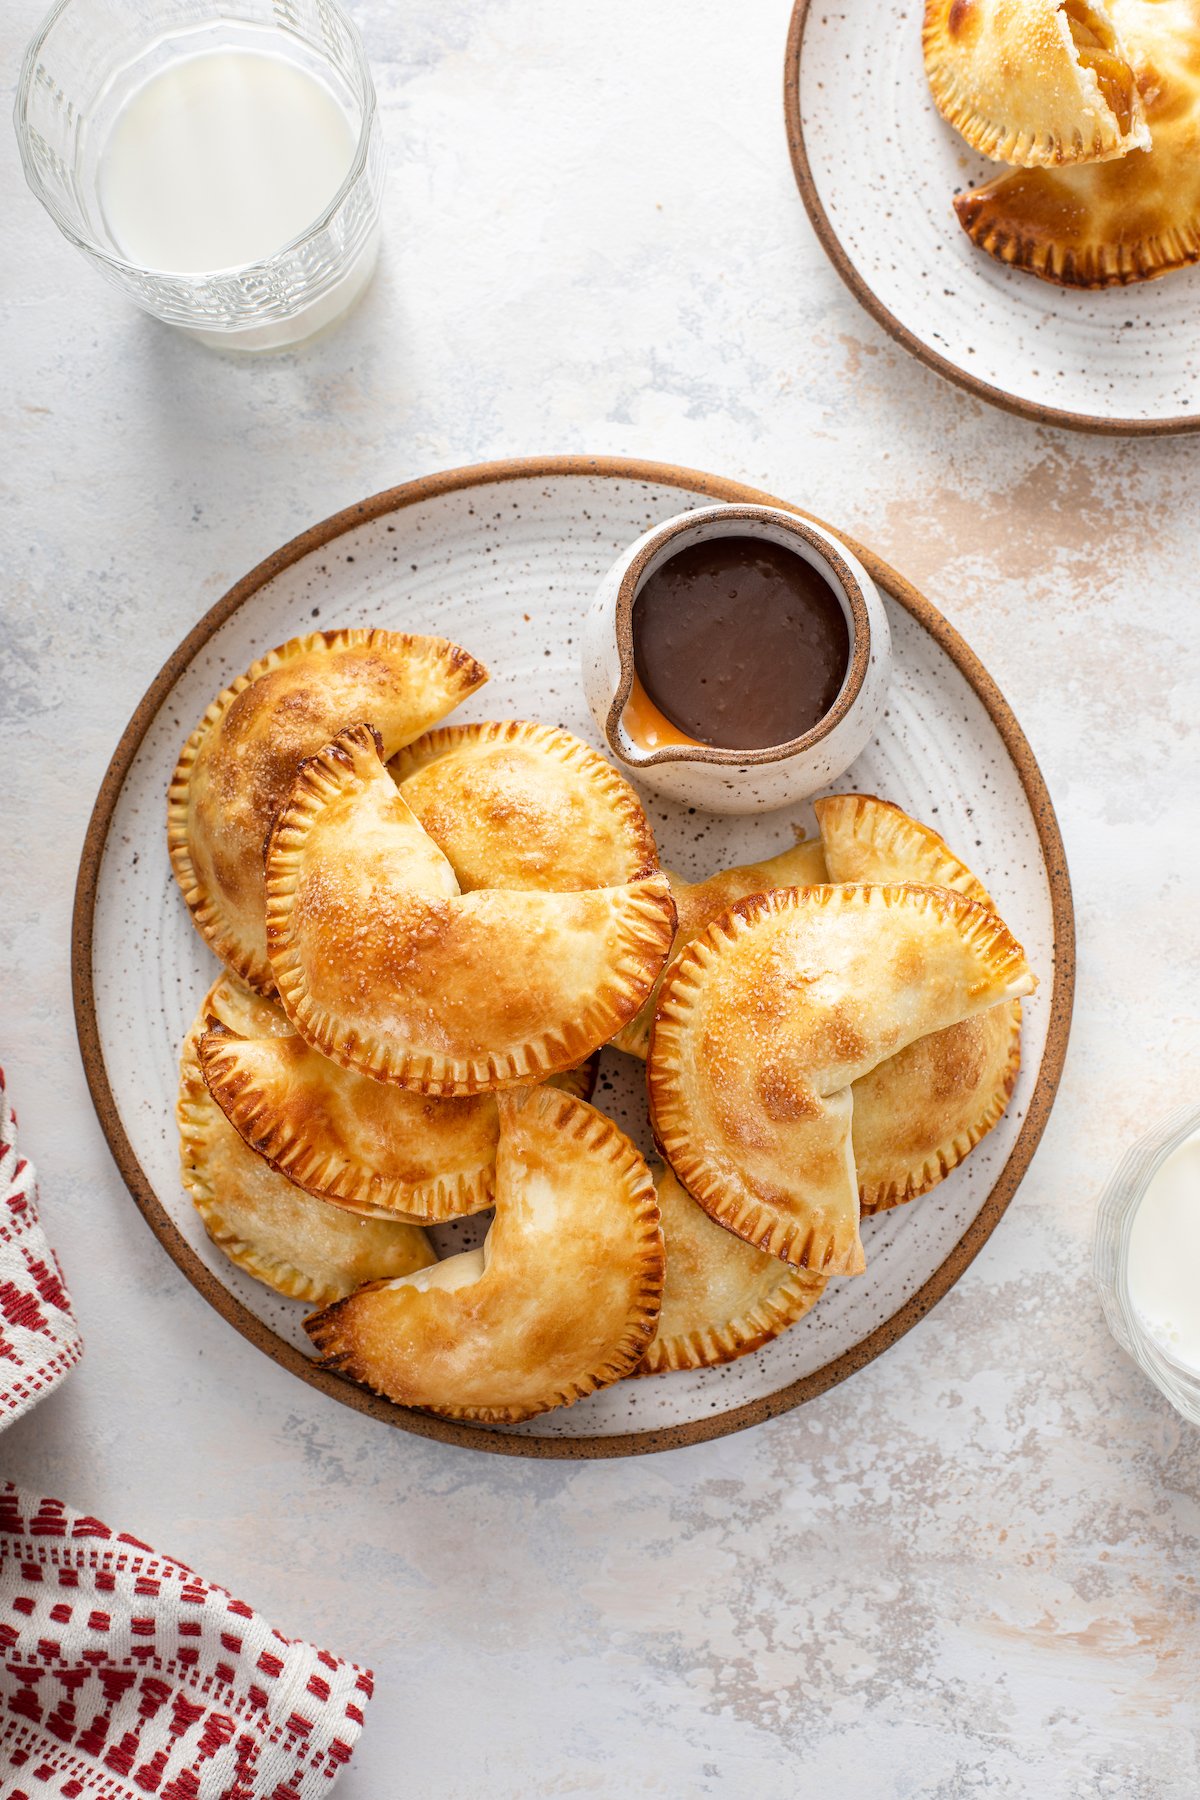 Overhead shot of a platter of empanadas on a platter, with a small syrup pitcher filled with caramel sauce.